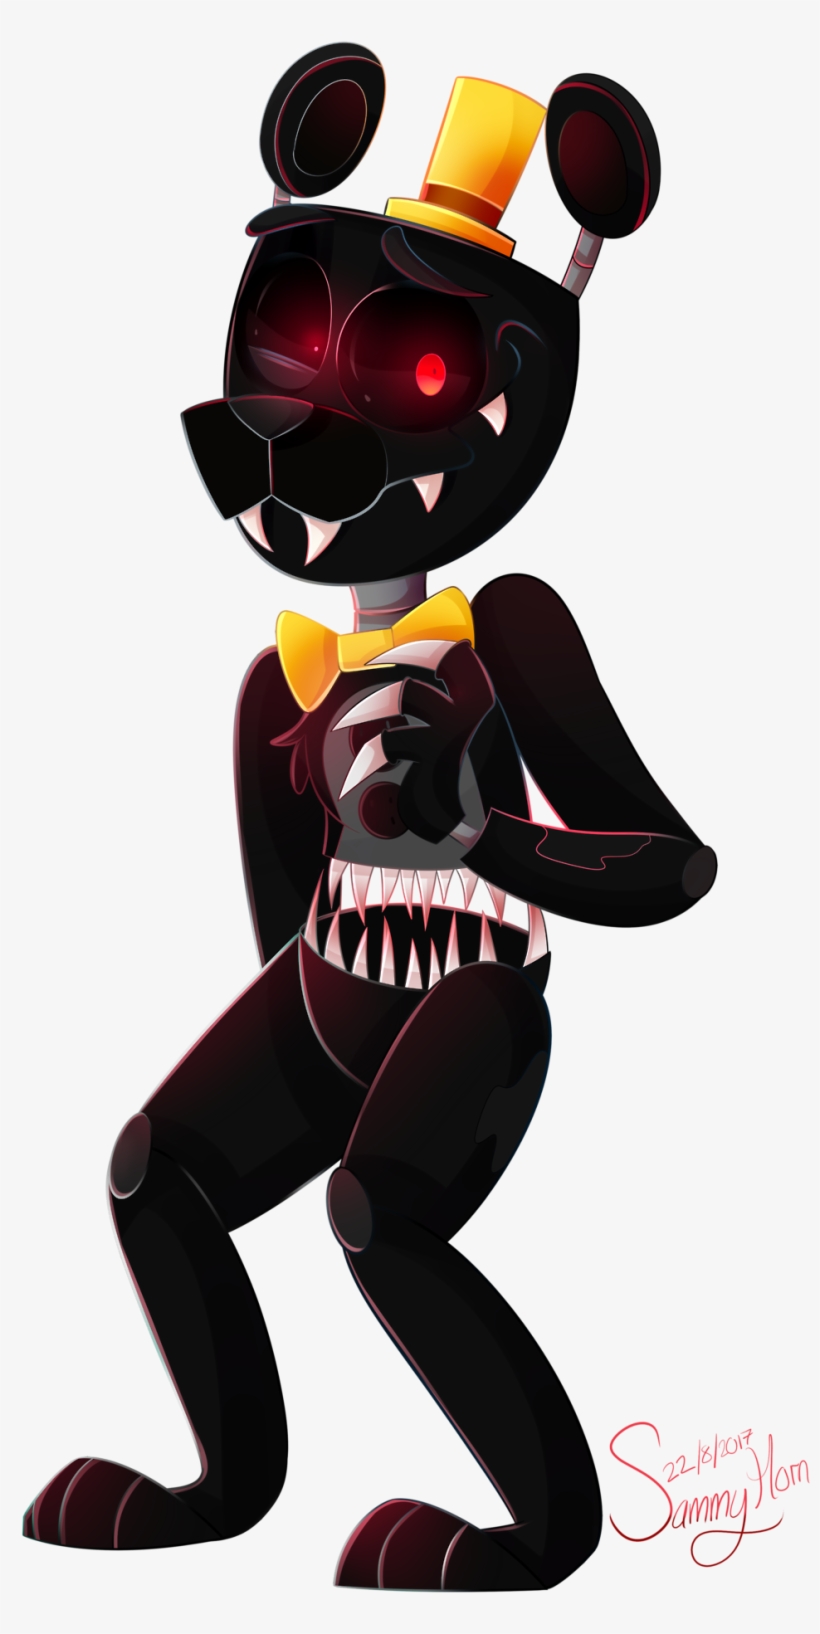 Pin By Snoobs01 On Five Nights At Freddy's - Five Nights At Freddy's, transparent png #4862896